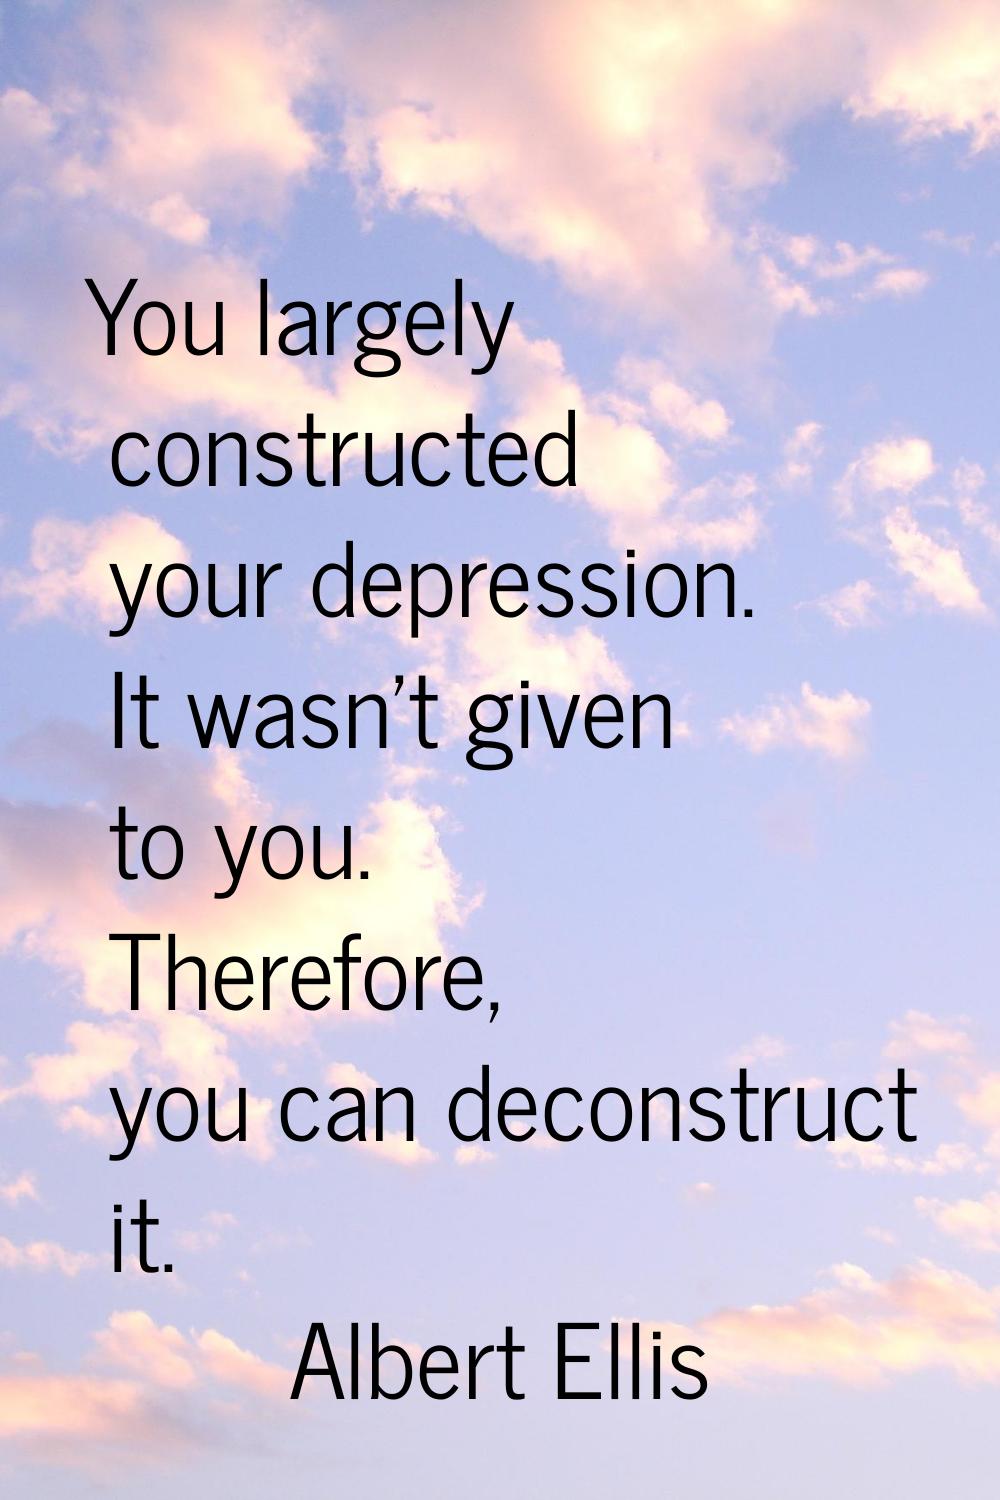 You largely constructed your depression. It wasn't given to you. Therefore, you can deconstruct it.